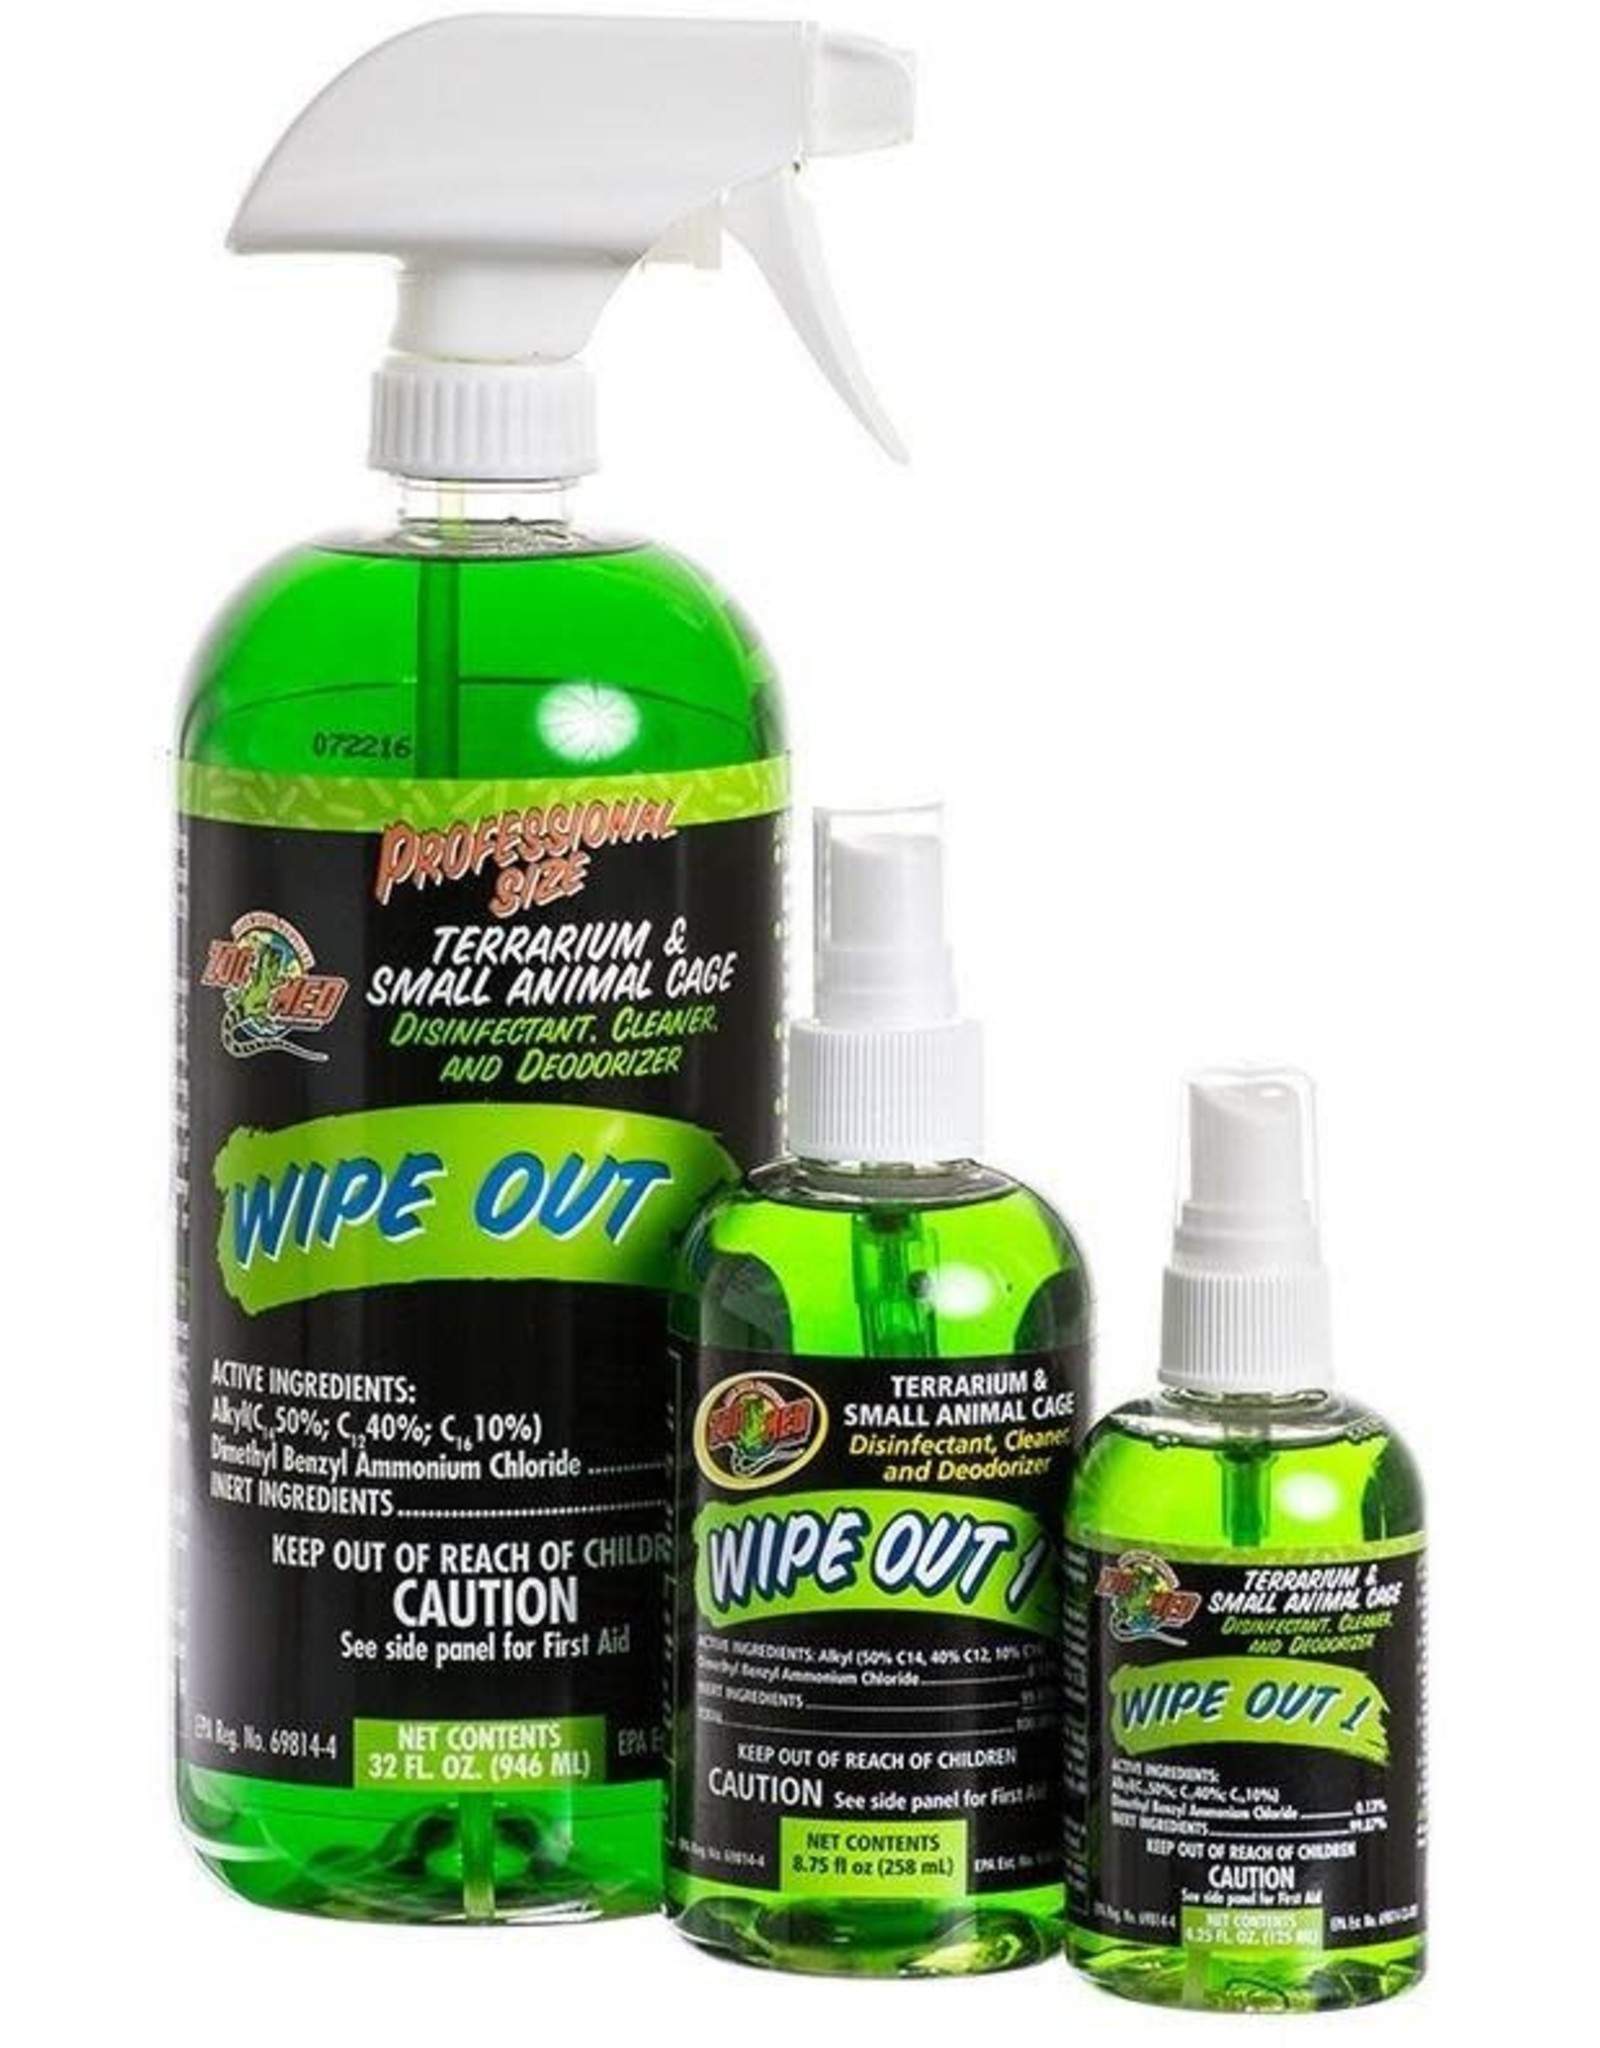 ZOO MED LABORATORIES, INC. ZOO MED- WO-132- WIPE OUT- TERRARIUM CLEANER/DISINFECTANT- 3.5X3.5X10- 32 OZ